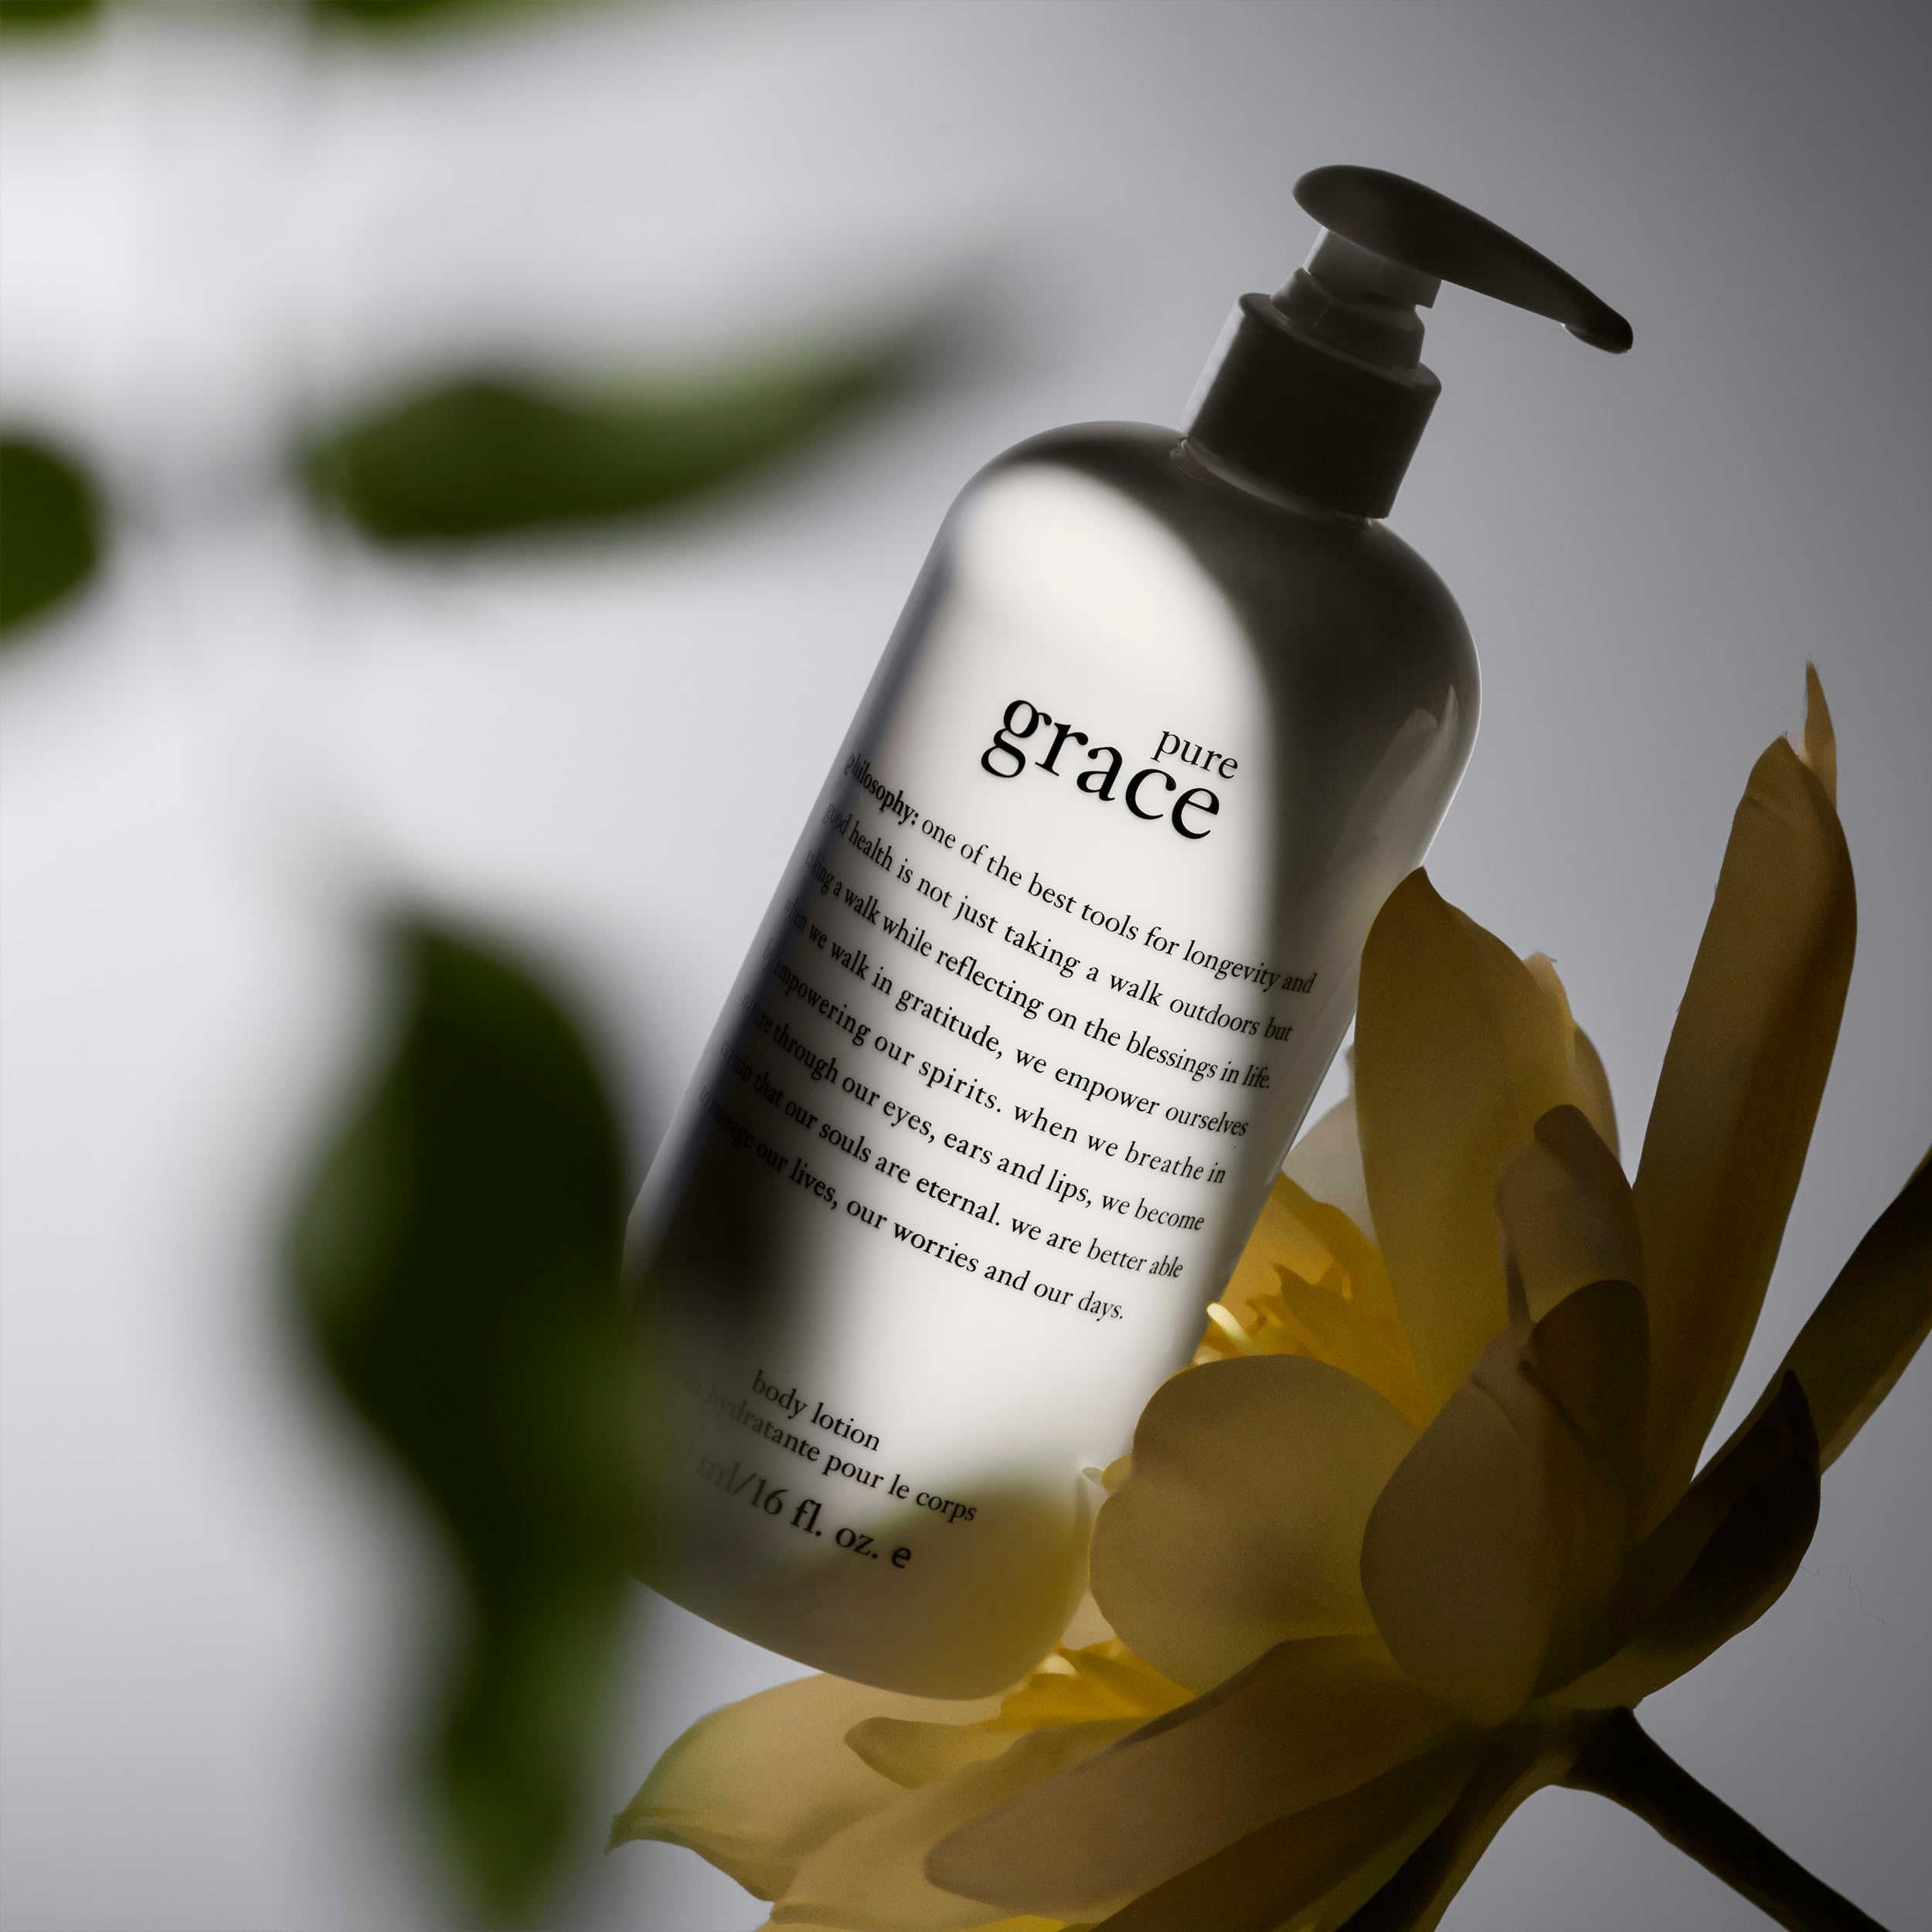 philosophy pure grace shower gel + body lotion bundle - Notes of water lily, leafy greens & musk